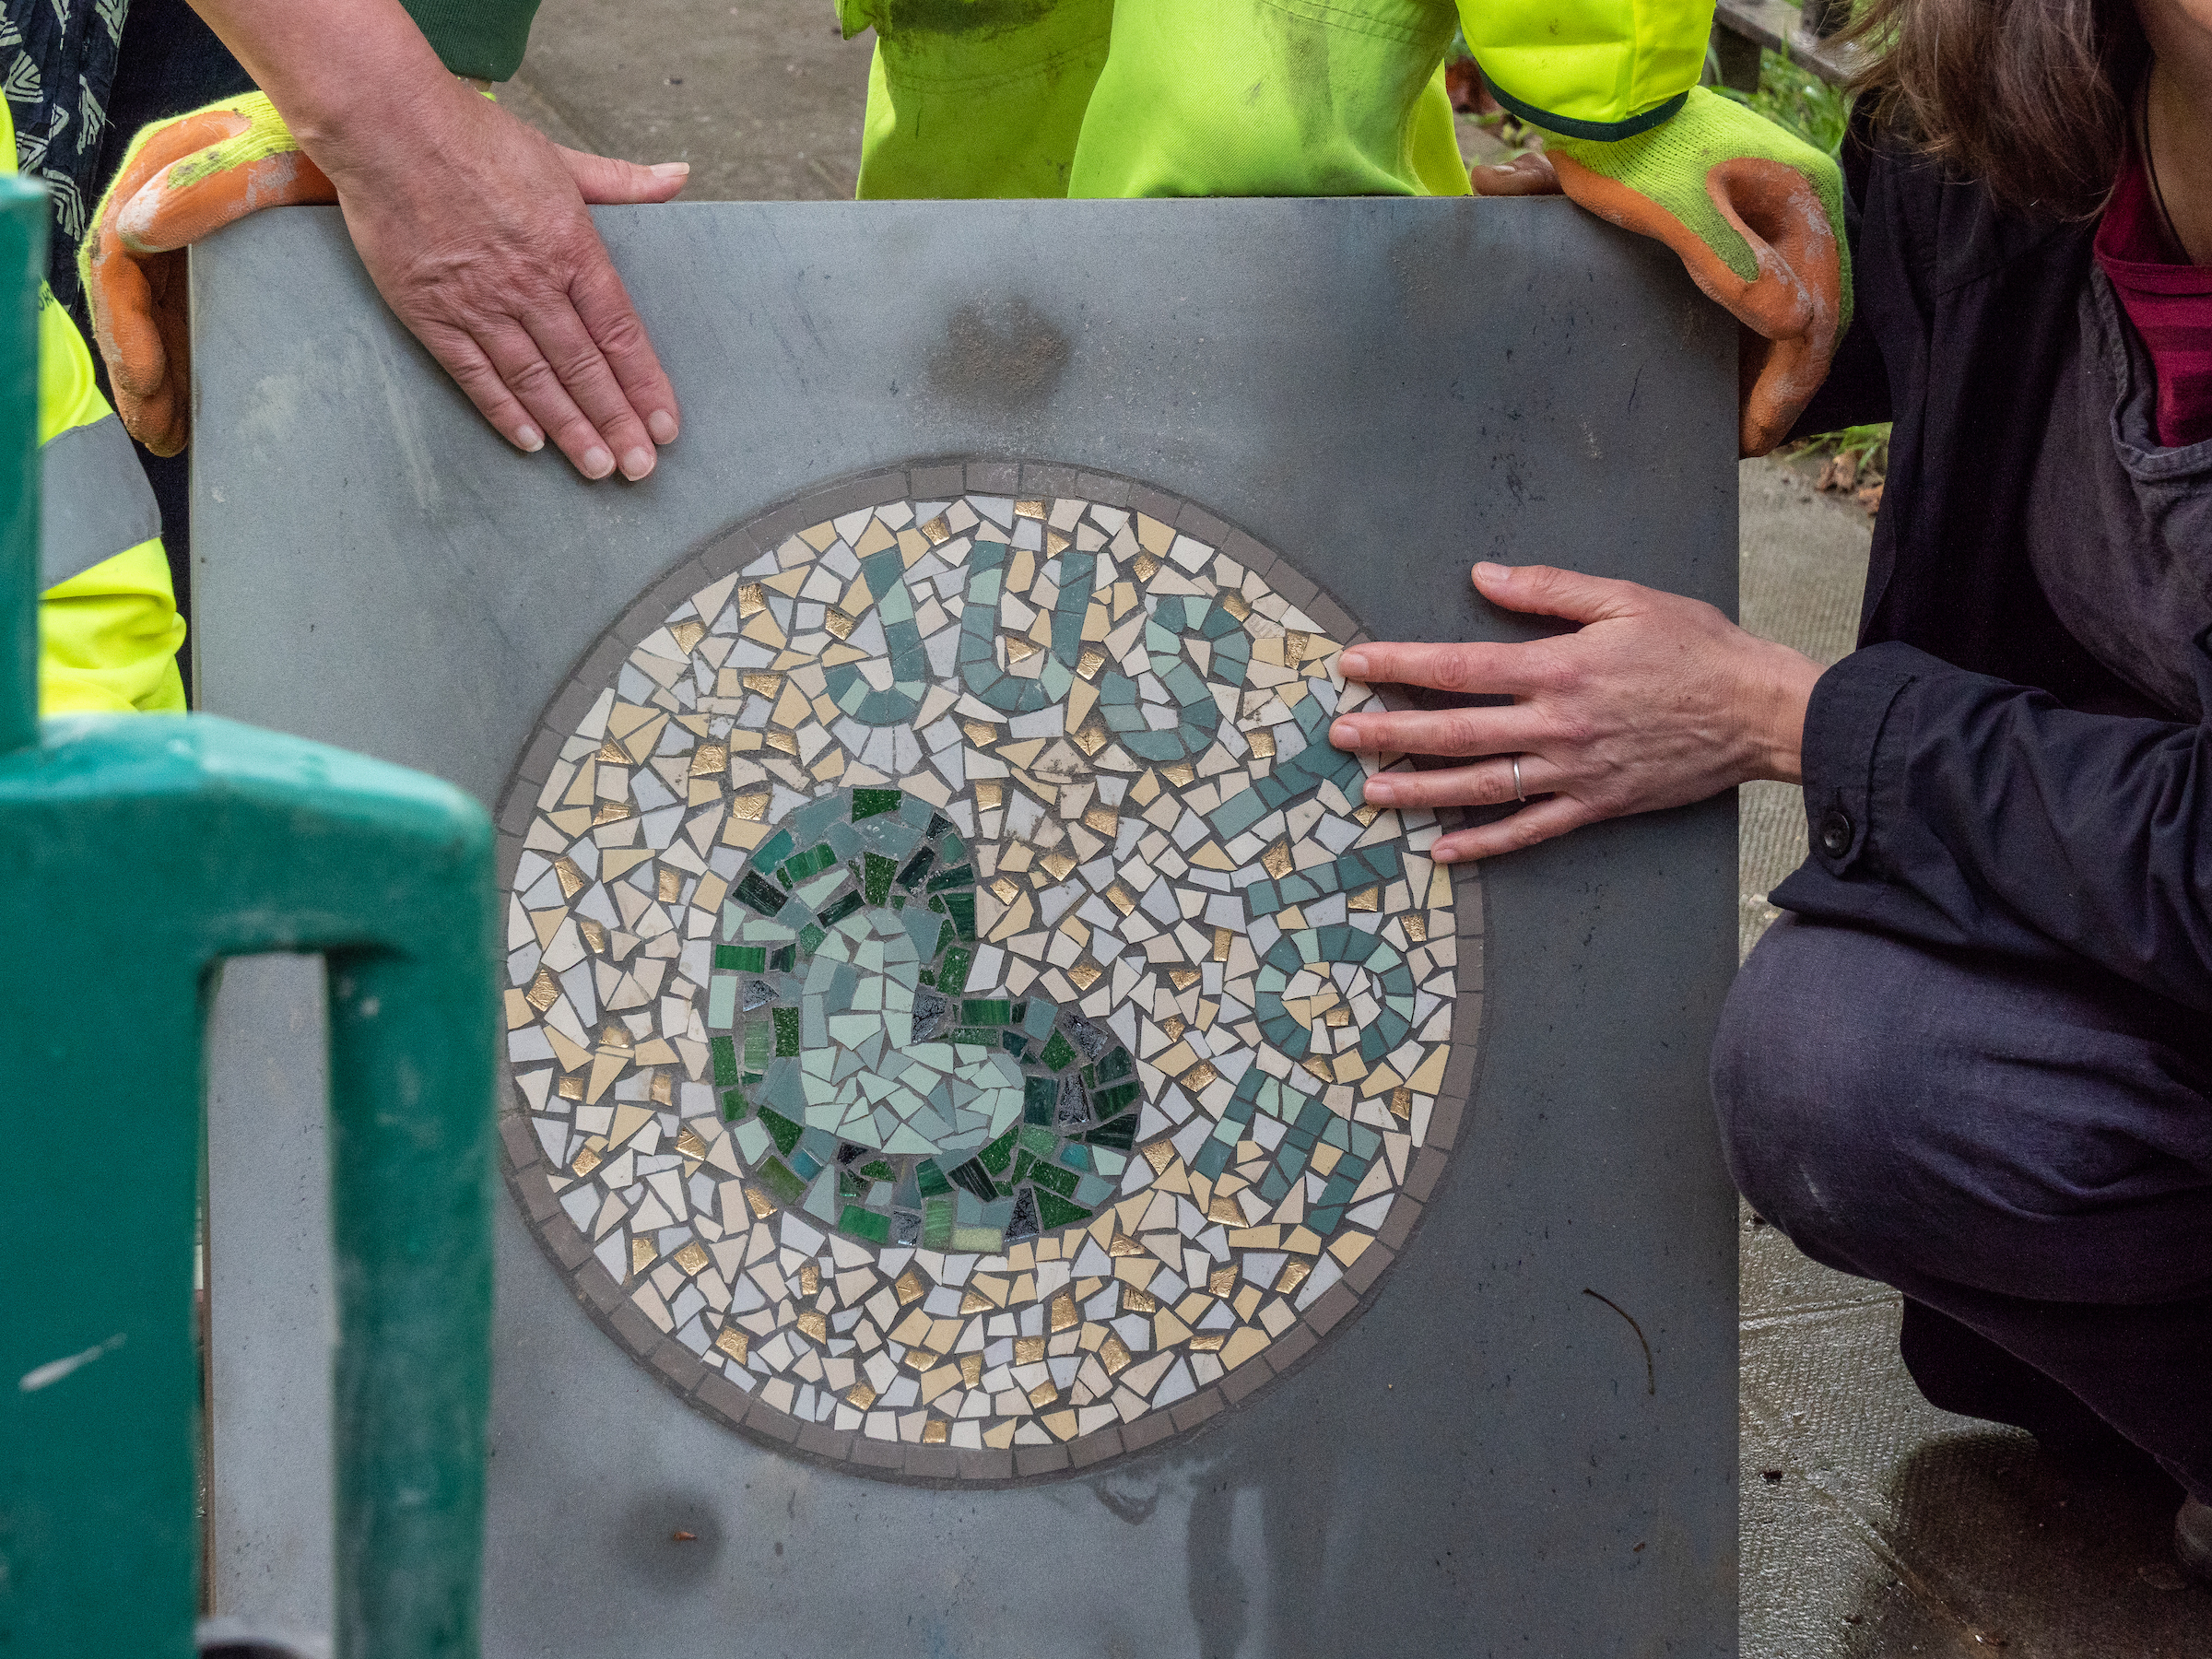 Walking as One, installation on the streets of North Kensington, London, as part of the Grenfell Memorial Community Mosaic. Photo by ACAVA Shoots (Andreia Sofia)